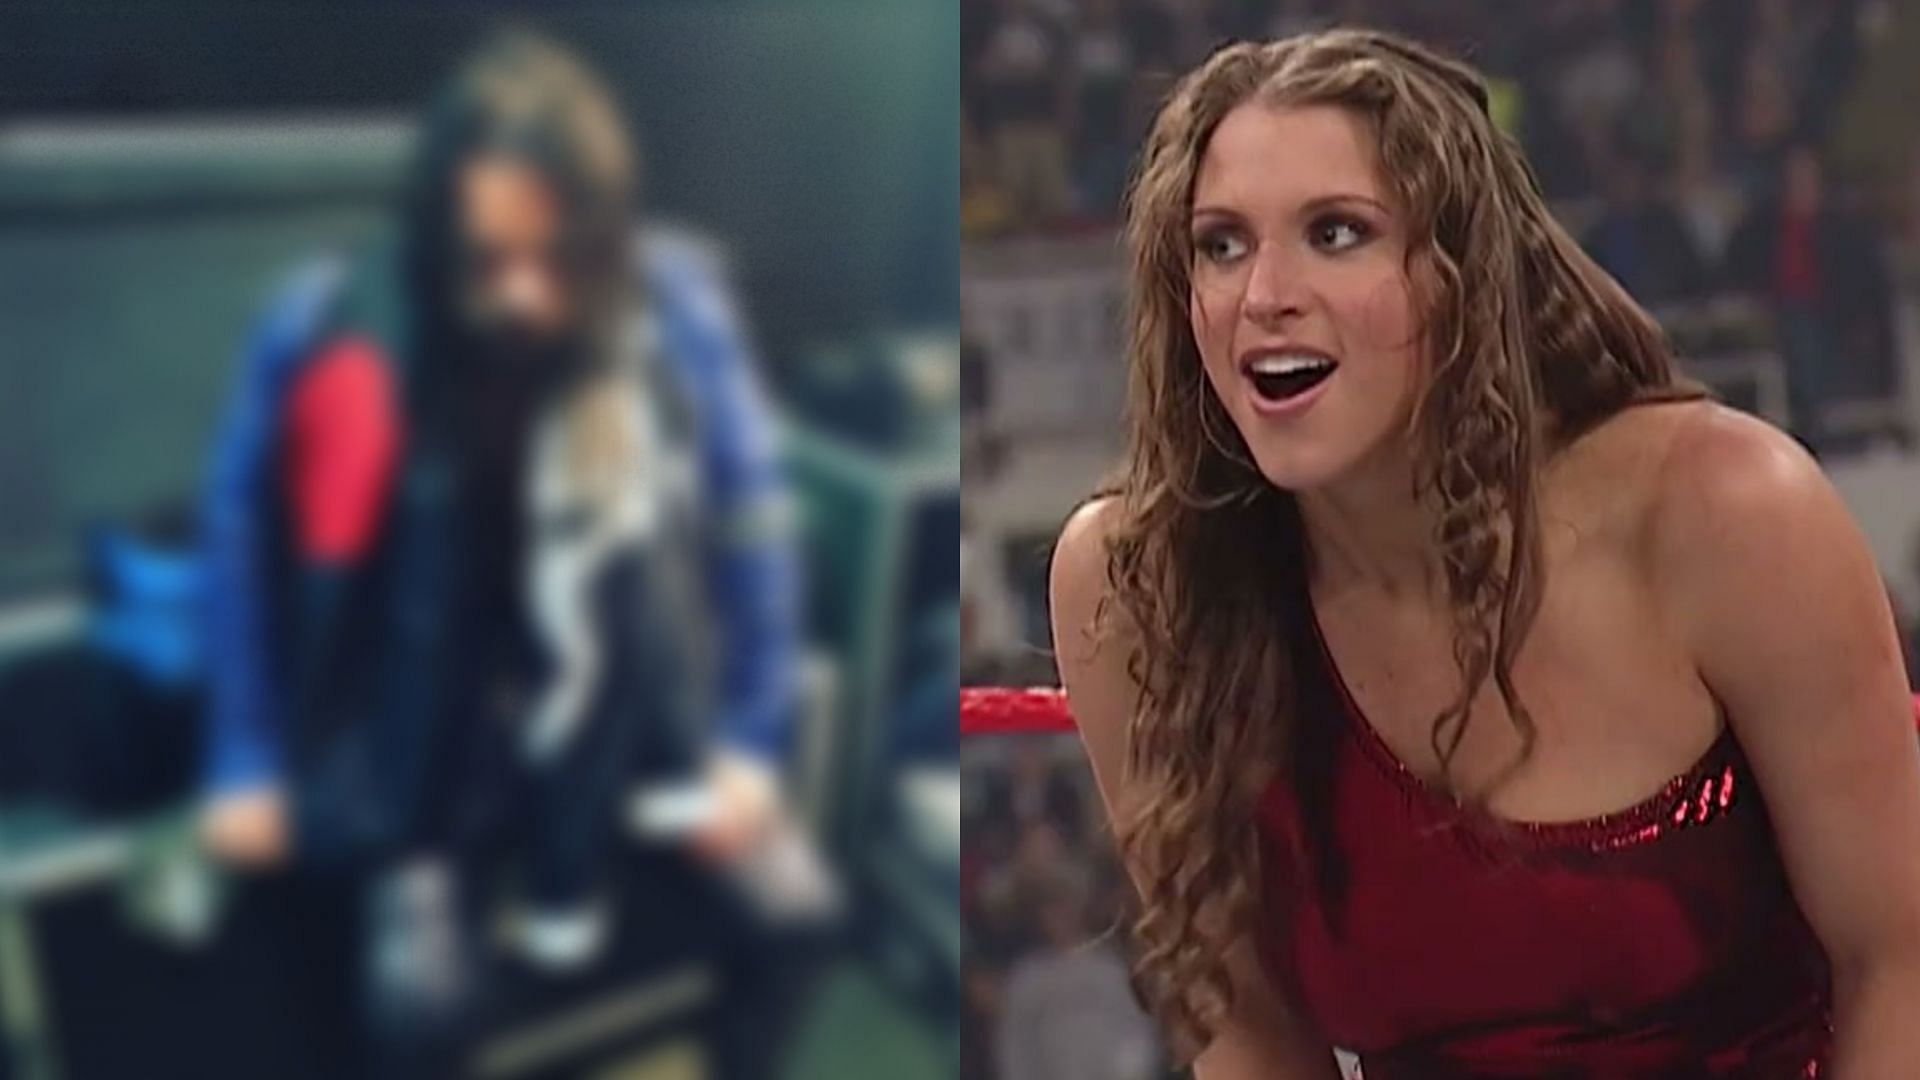 Brian Kendrick (left) and former WWE Chairwoman Stephanie McMahon (right)